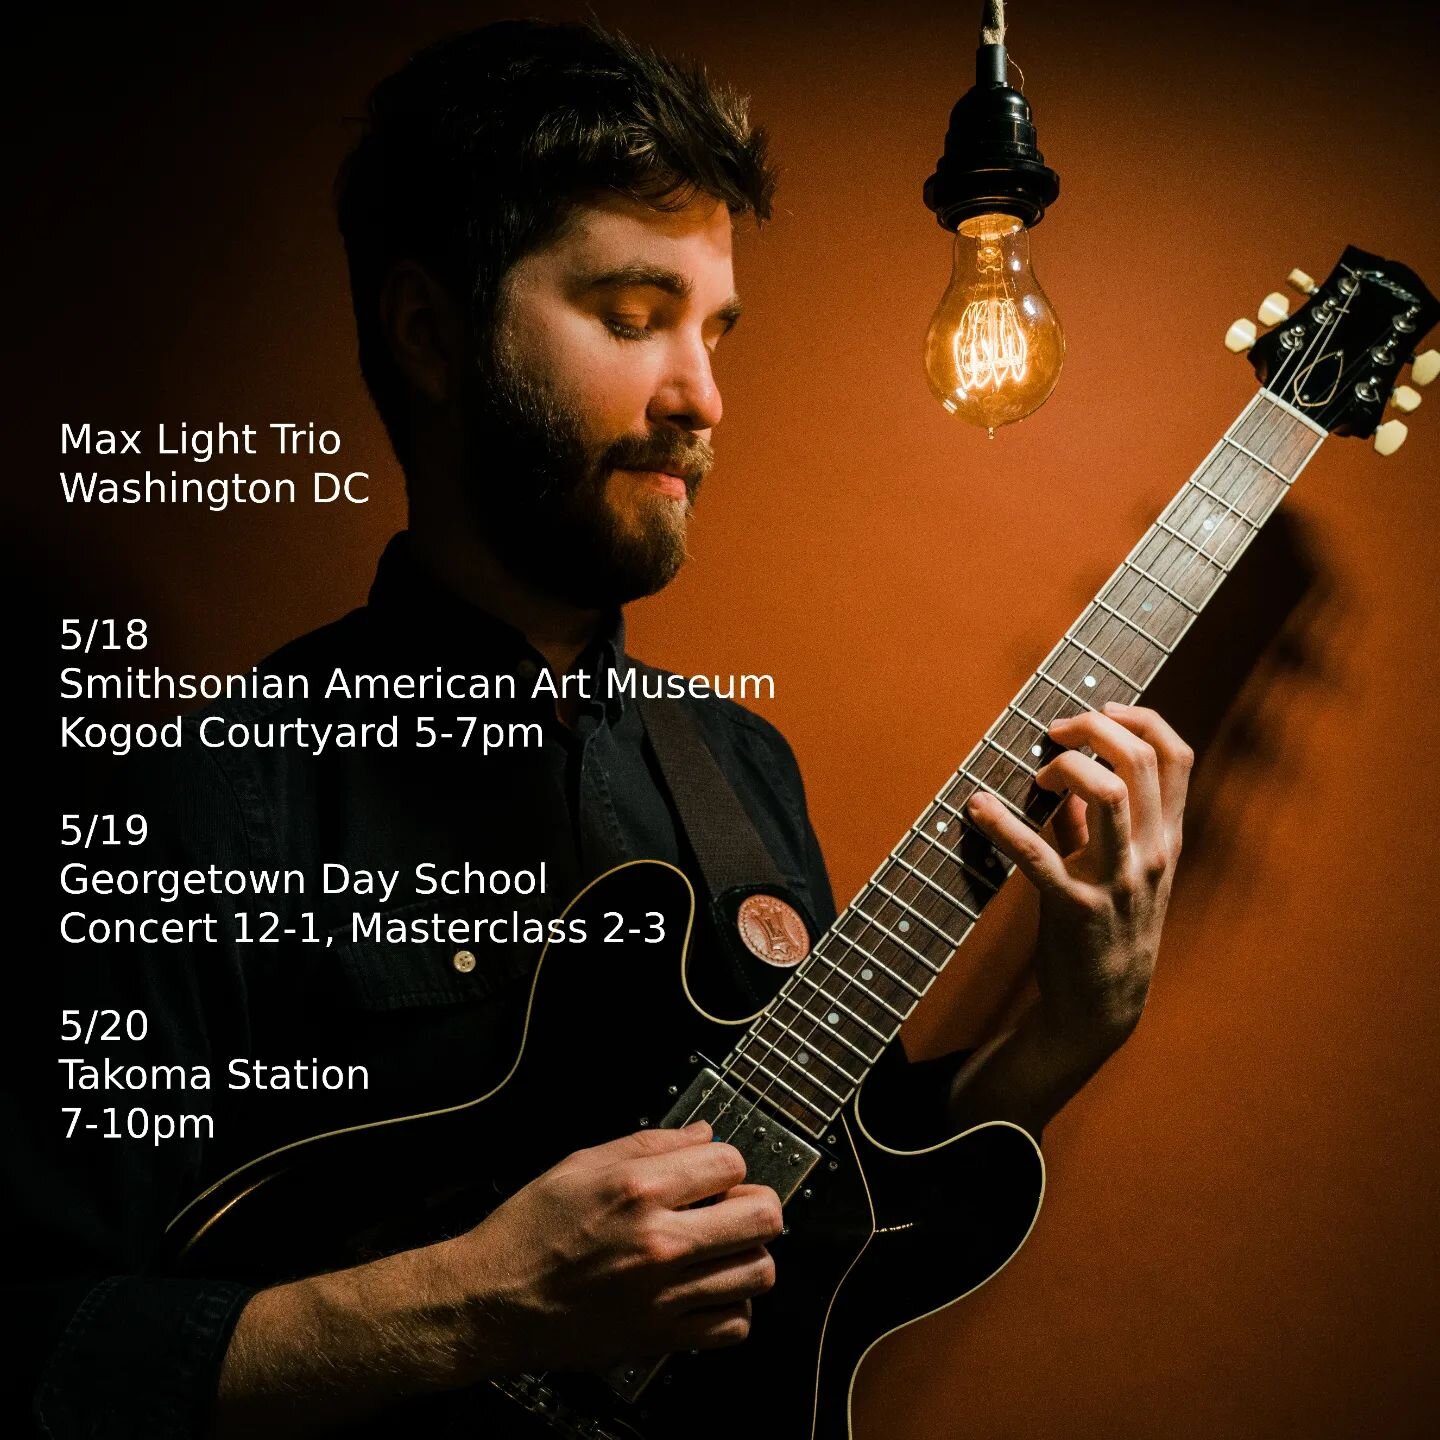 Very excited to be bringing my trio with @matt.honor.drums and @iamsimonwillson to the nation's capital for some shows next week. Hope to see you at one of these performances!

5/18
@smithsonian American Art Museum
5-7pm in the Kogod Courtyard, free 